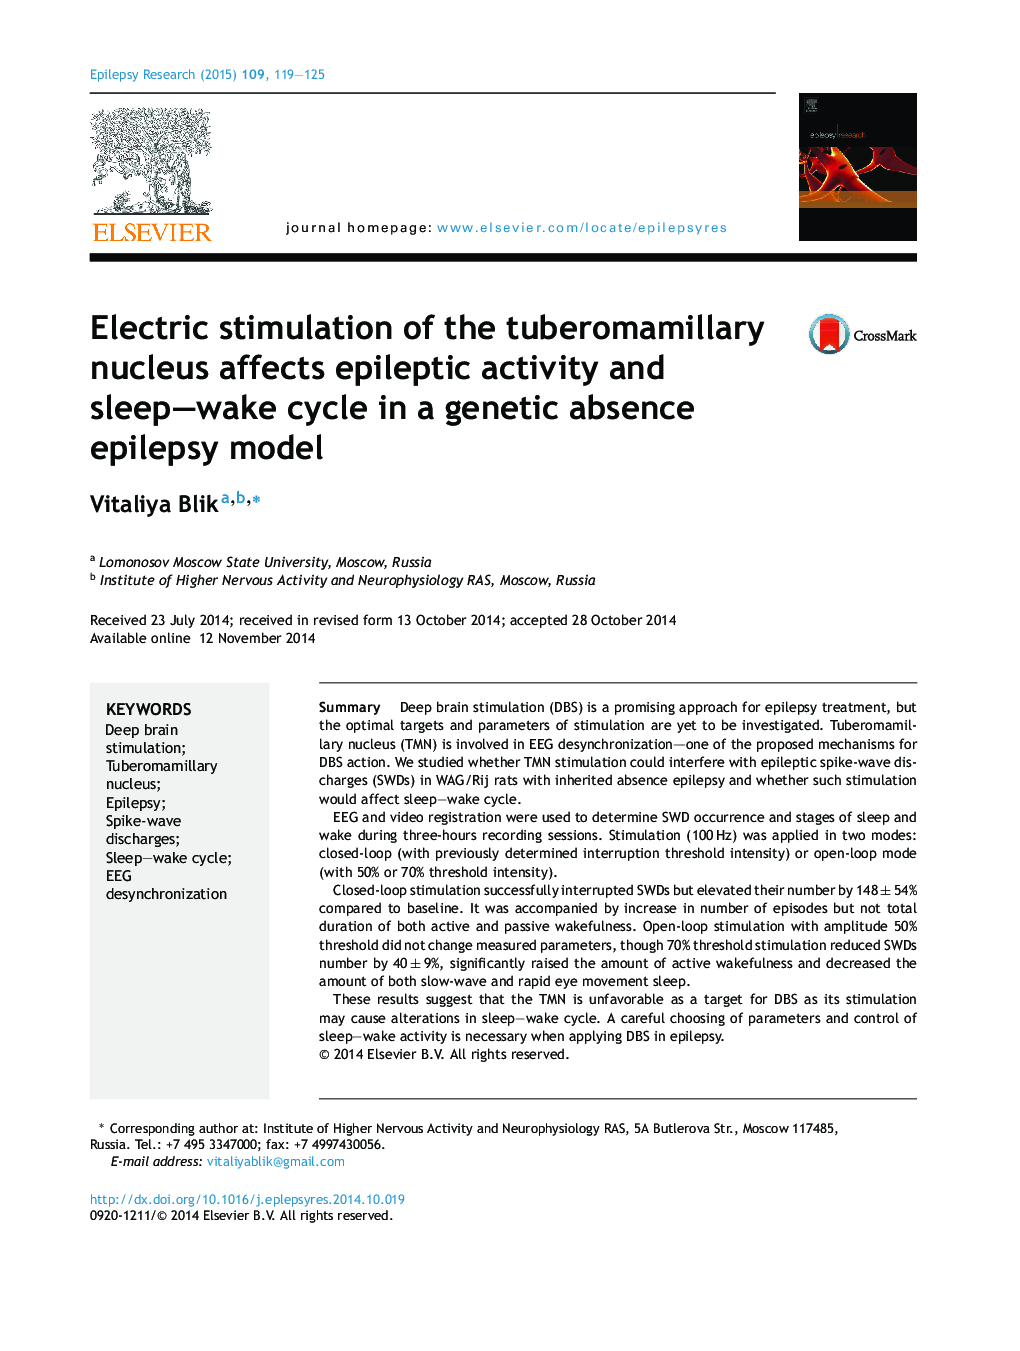 Electric stimulation of the tuberomamillary nucleus affects epileptic activity and sleep-wake cycle in a genetic absence epilepsy model